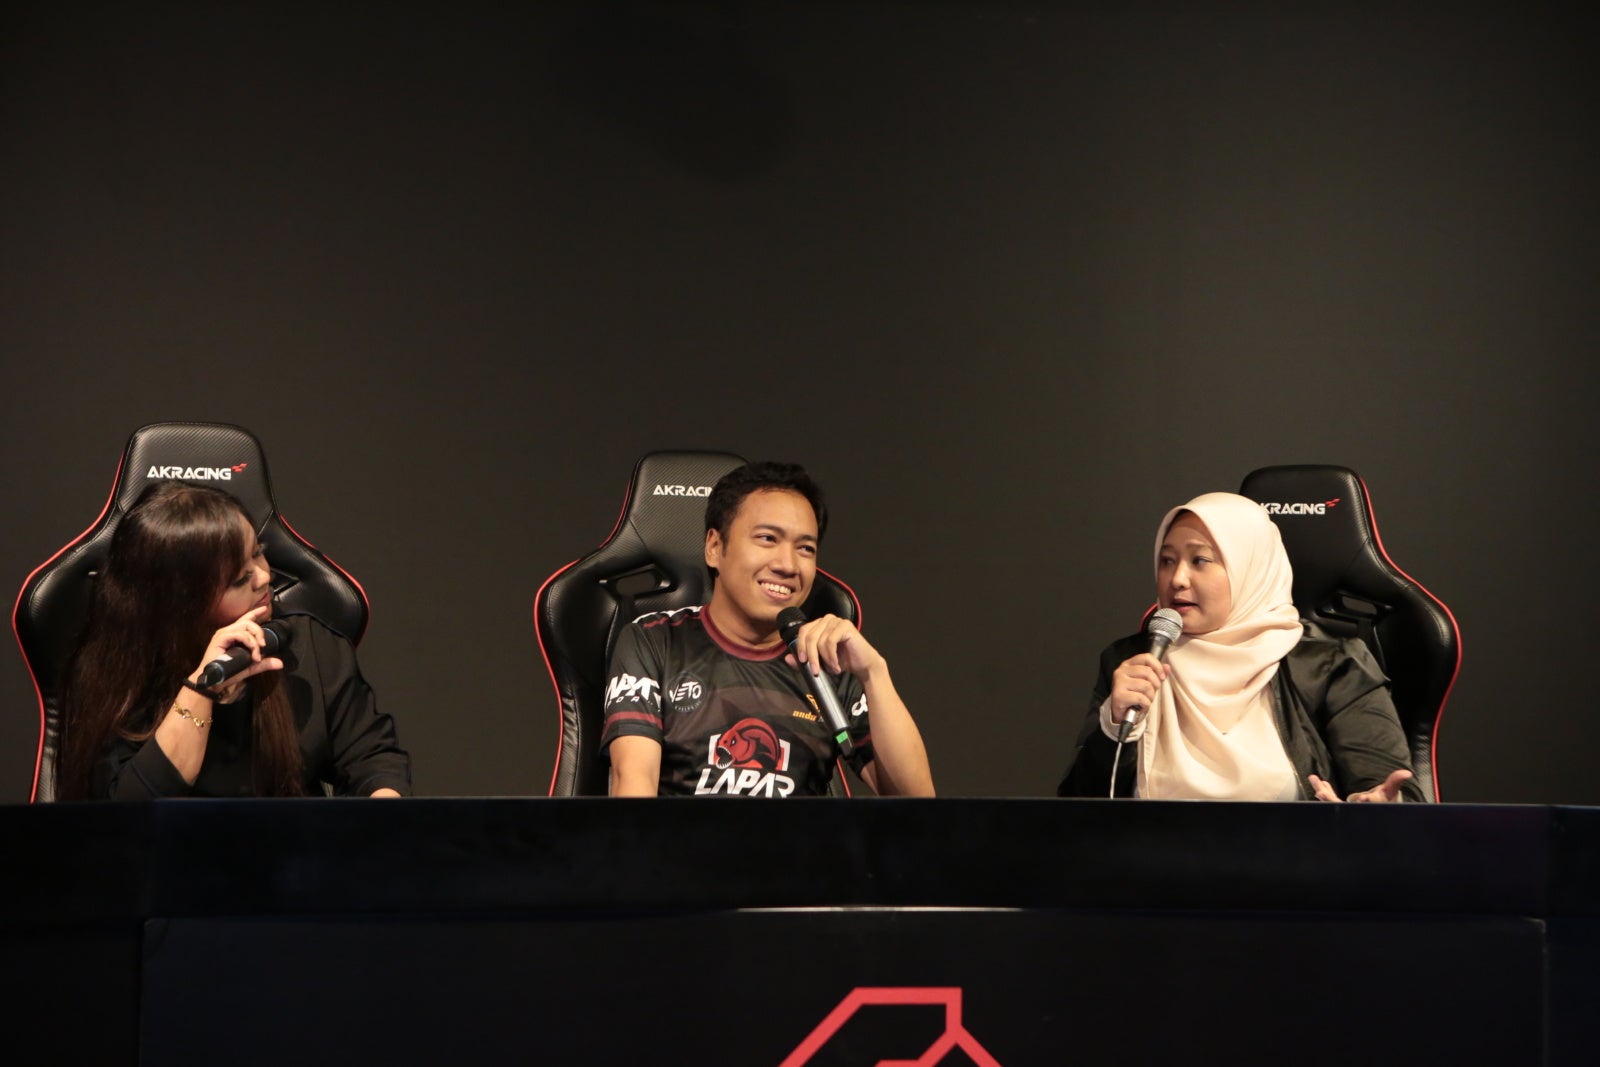 From Mamaks to Sold Out Arenas: This EPIC Local eSports Team Shares Their Success in the Gaming Industry! - WORLD OF BUZZ 10